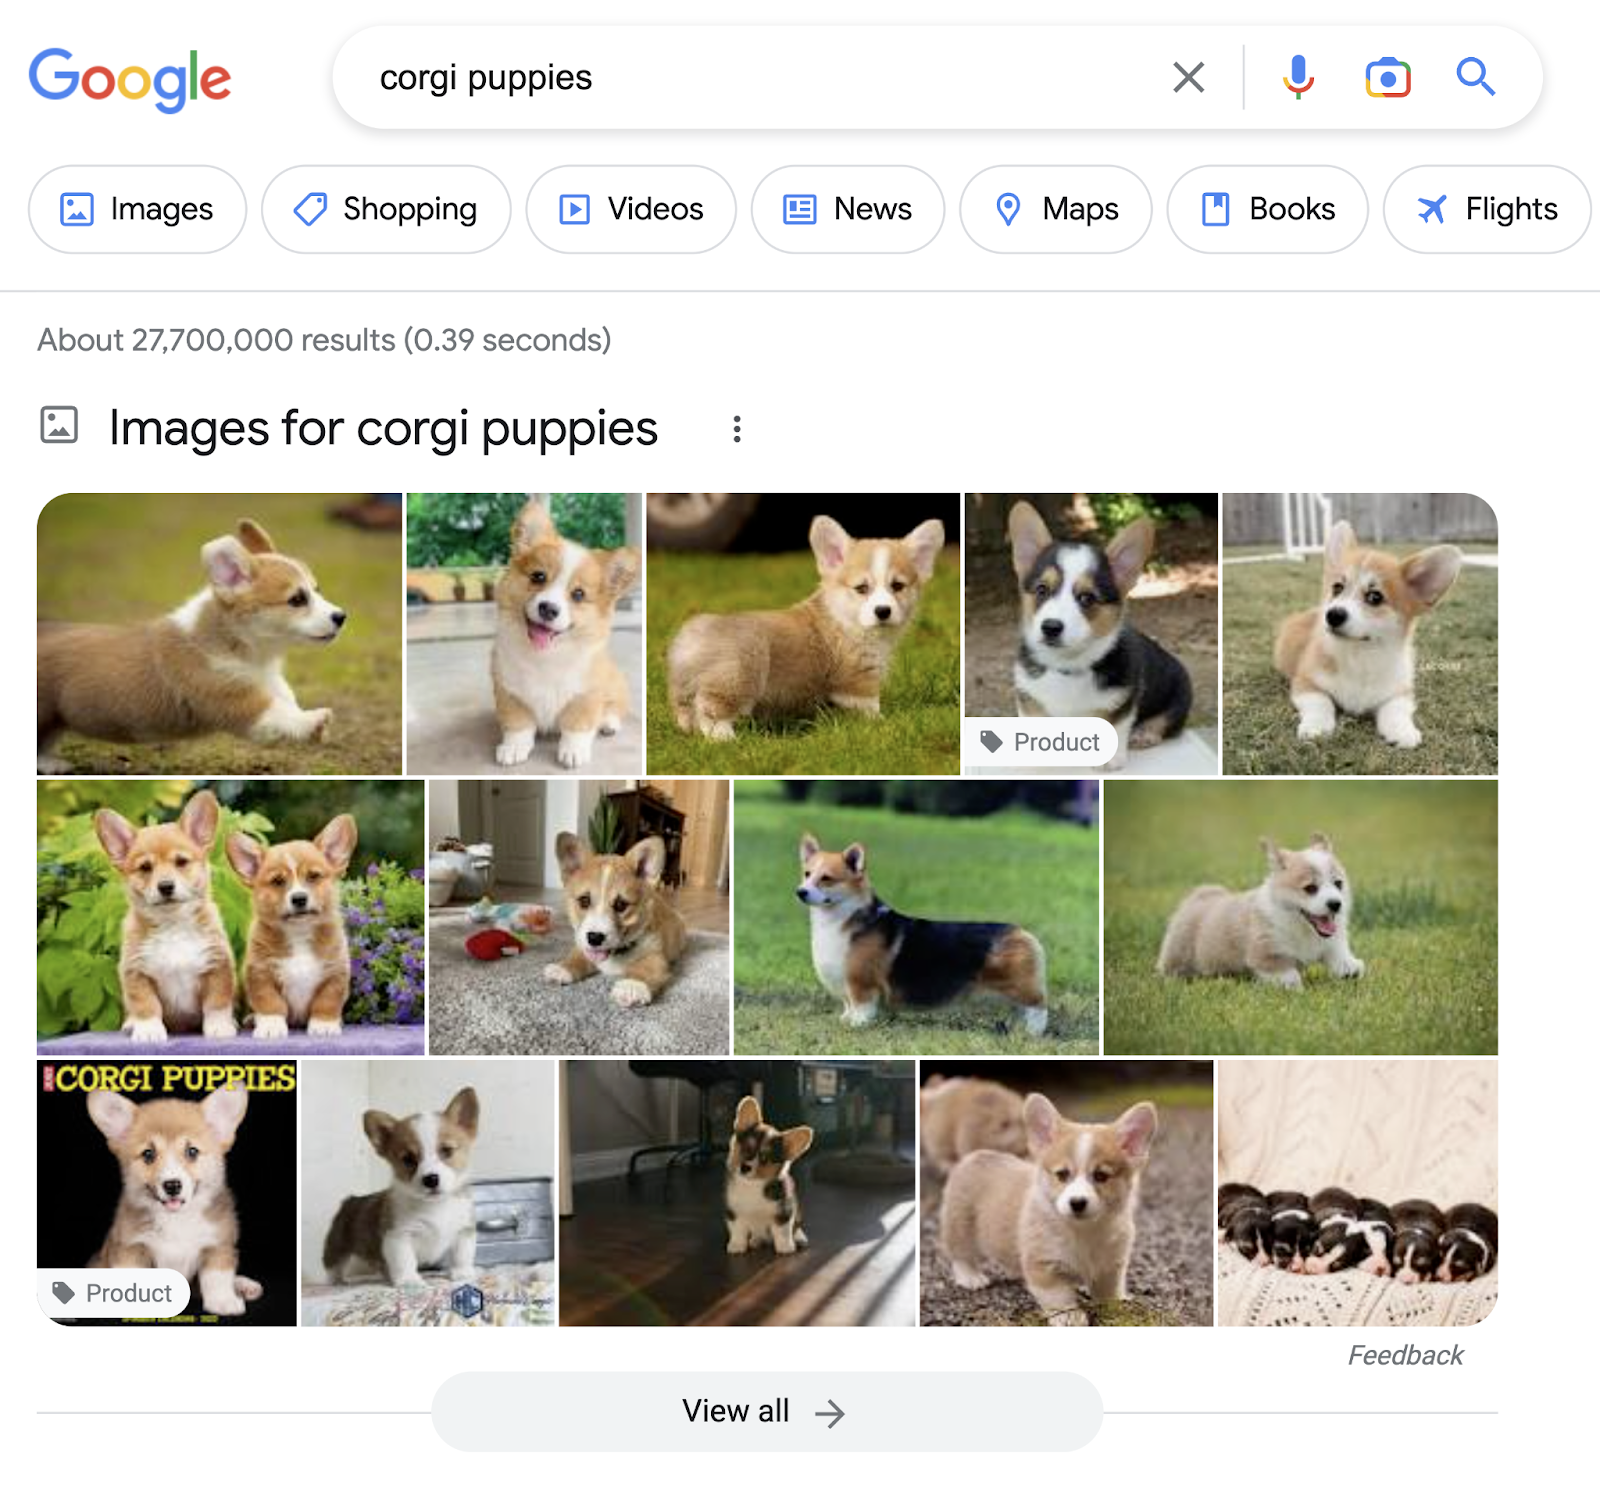 Google search results for "corgi puppies." There are multiple photos of corgi puppies at the top.